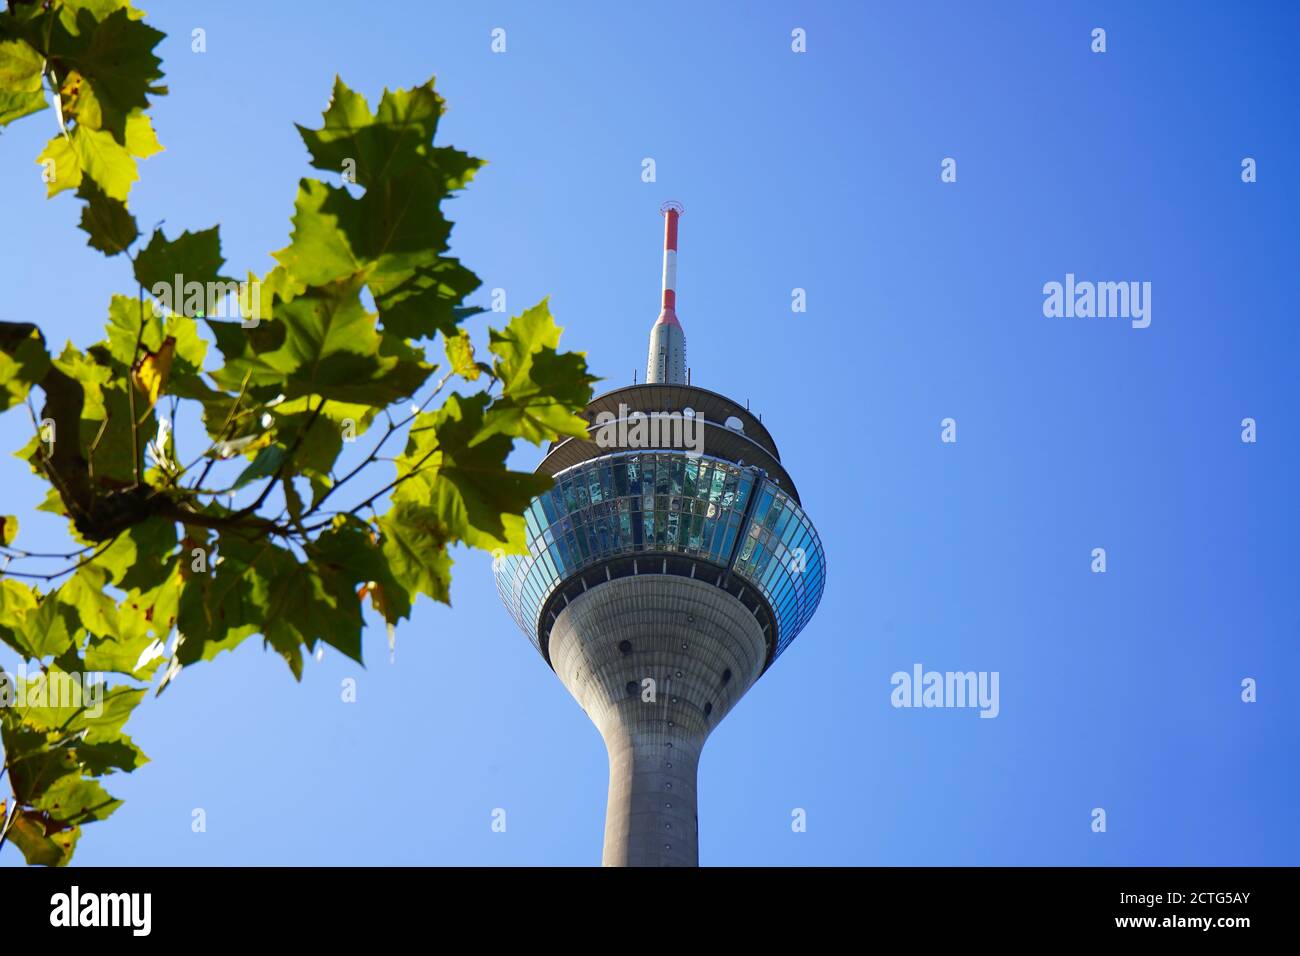 Rhine Tower (German: Rheinturm), Düsseldorf's landmark, on a sunny day in late summer. Selective focus with blurred leaves of a tree in foreground. Stock Photo